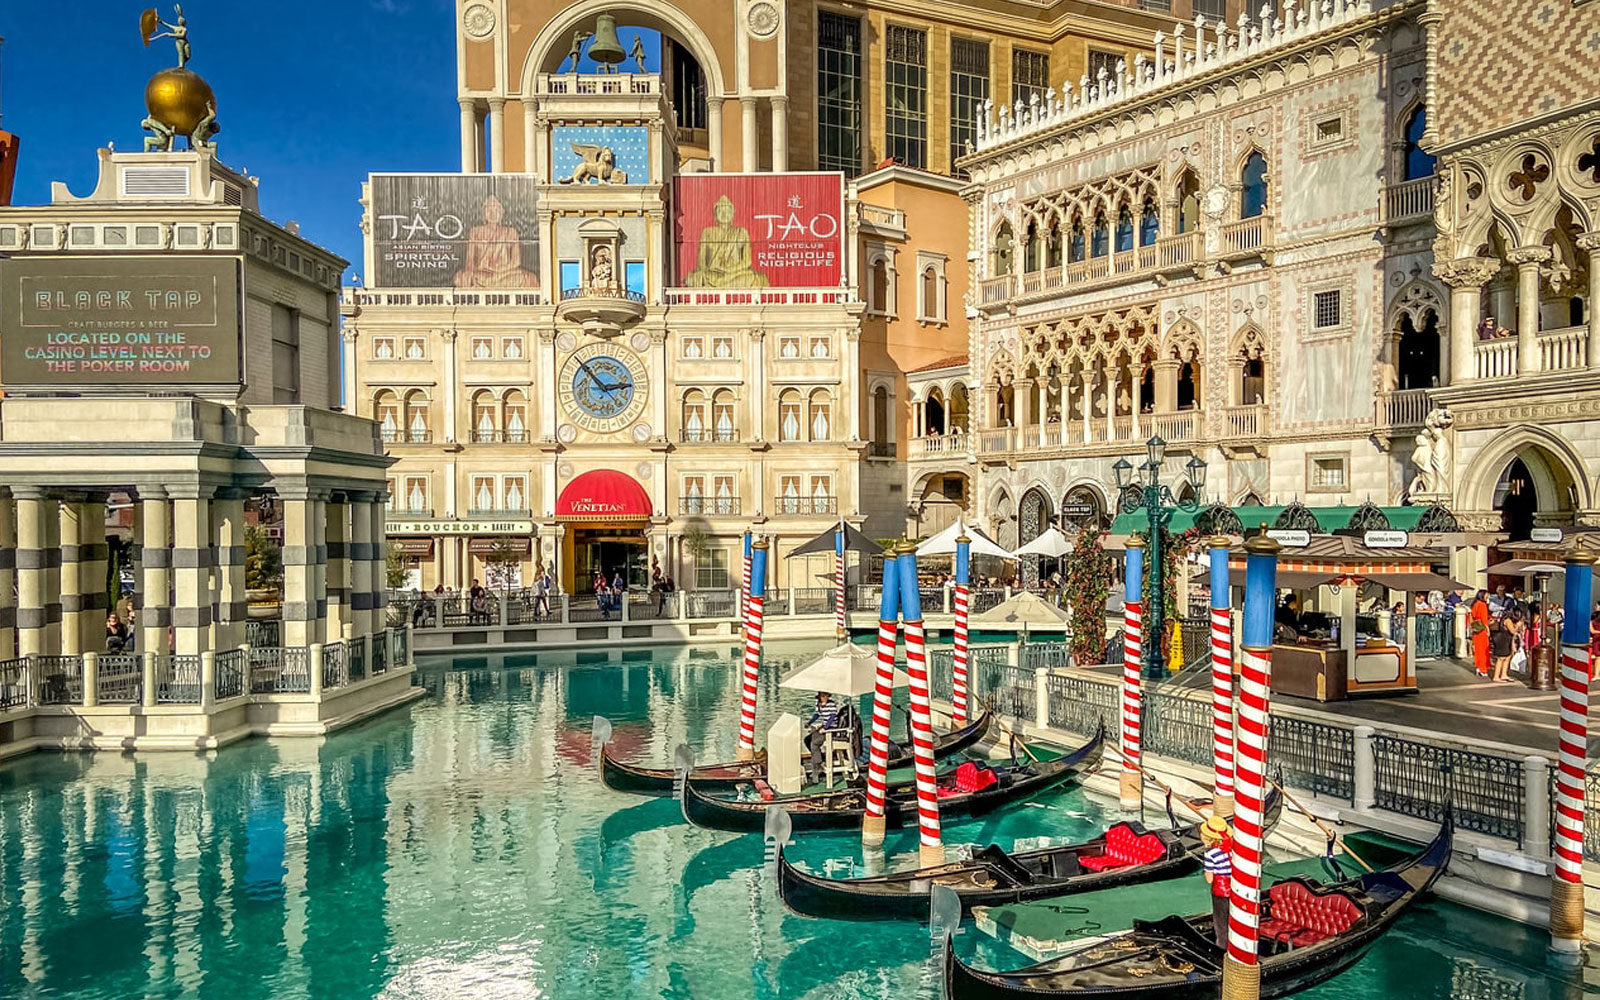 The Venetian is one of the defining casino resorts in Las Vegas